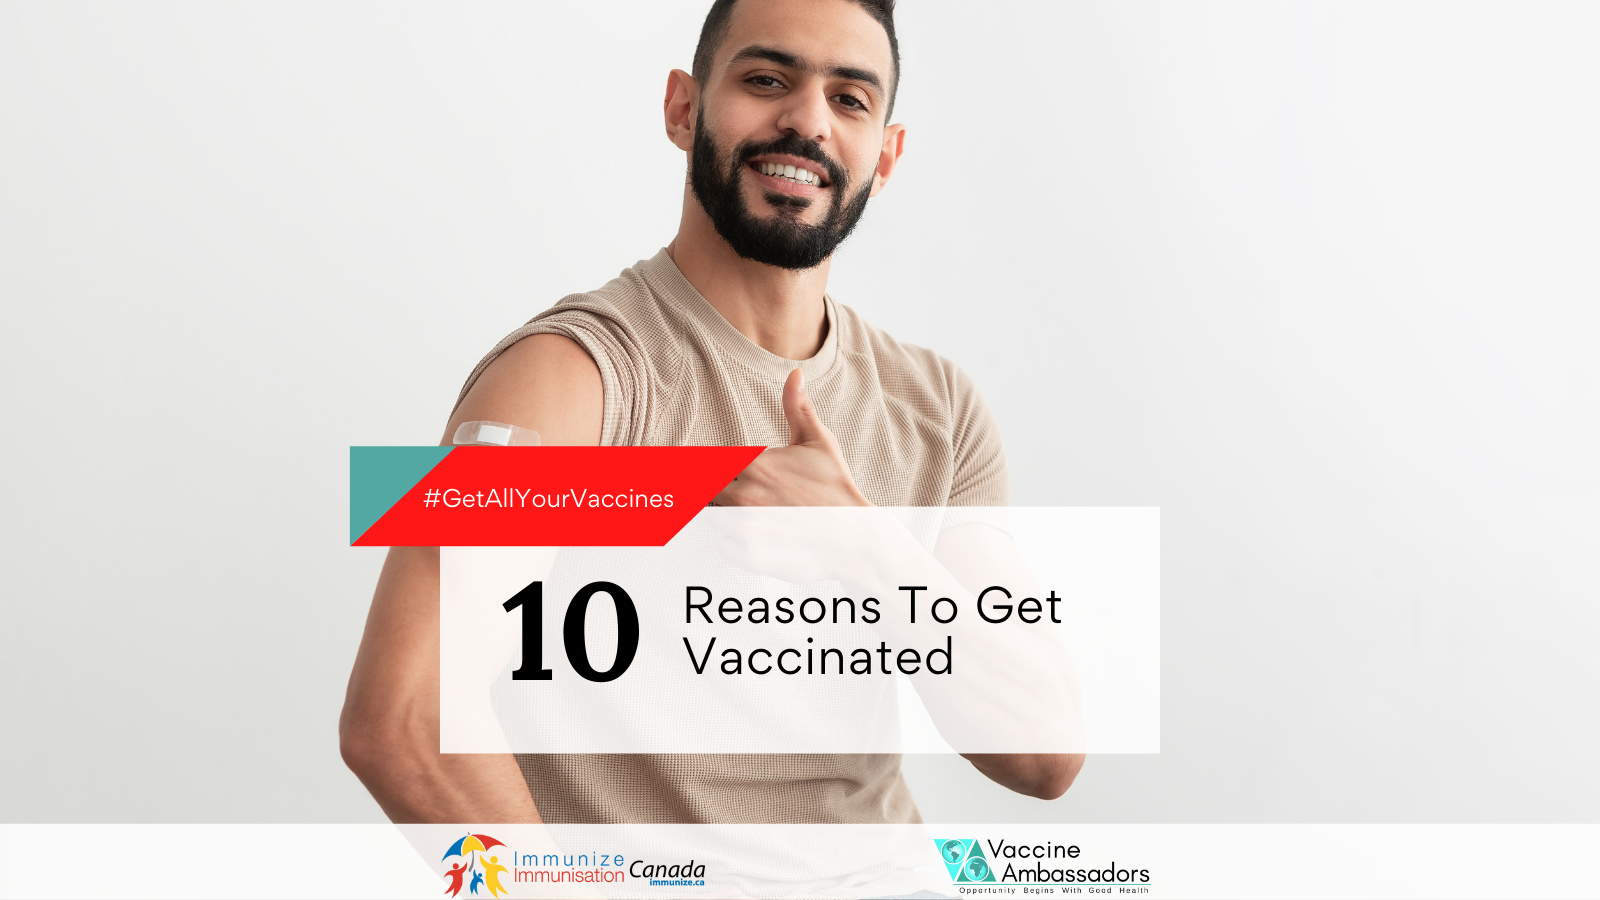 10 reasons to get vaccinated - social media image title - Twitter